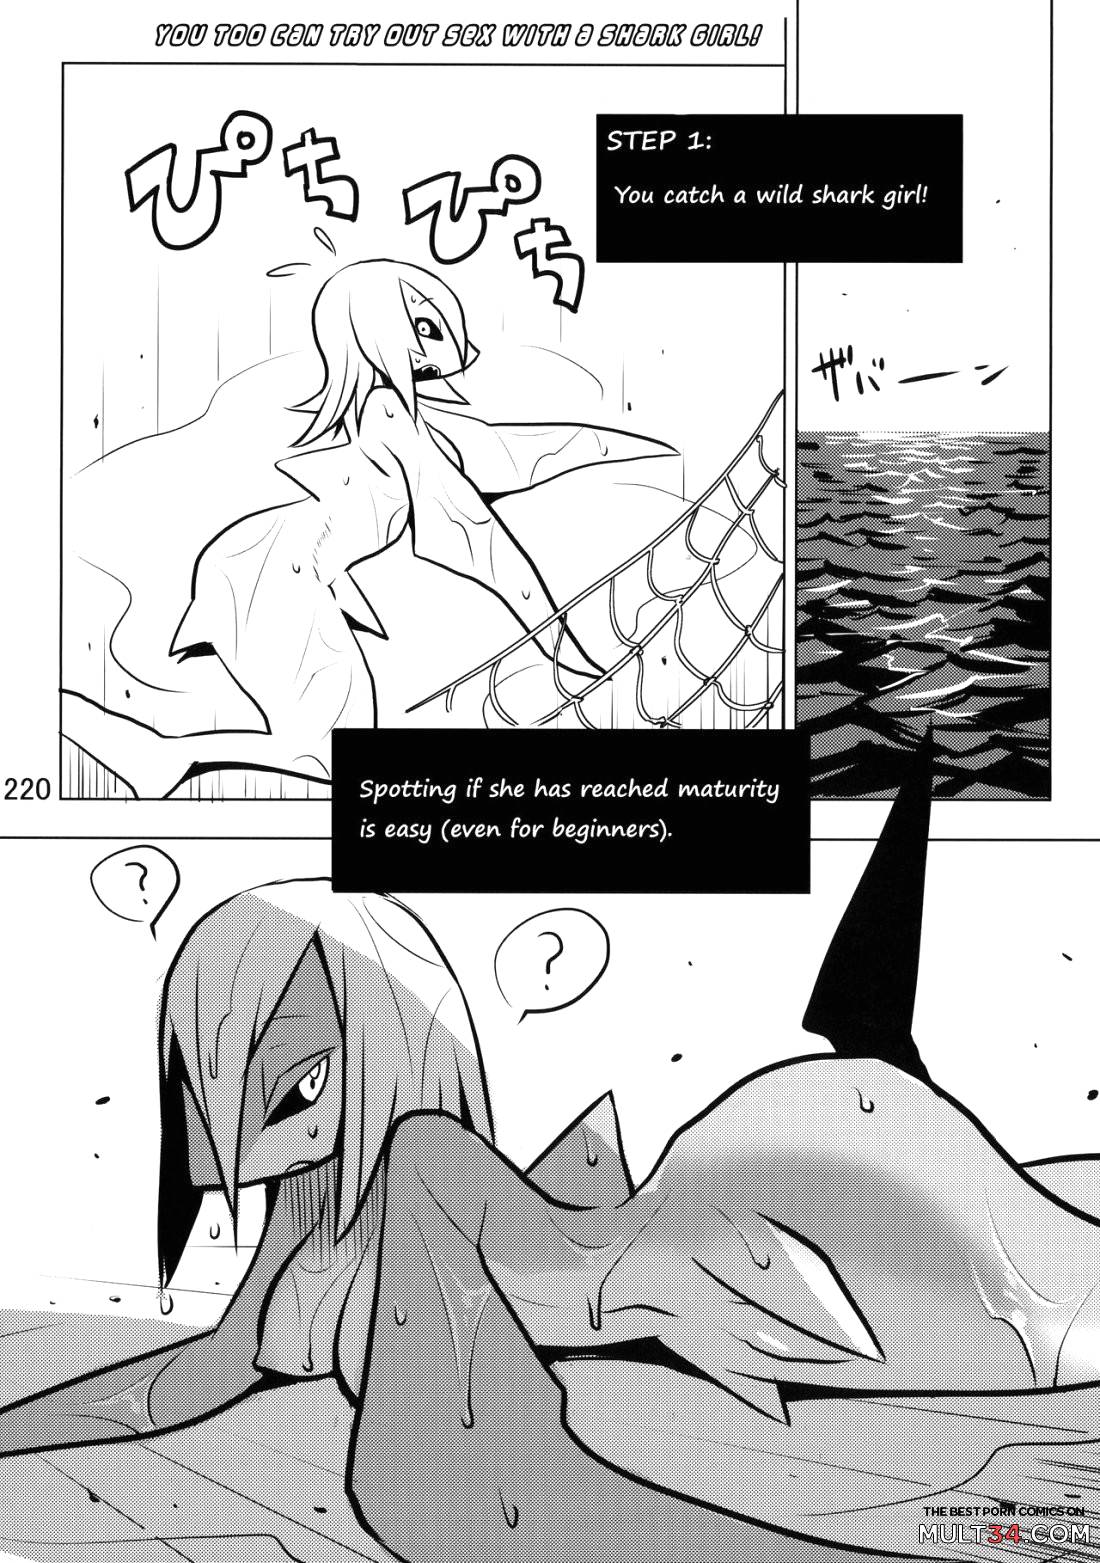 A Guide to Shark Sex page 2